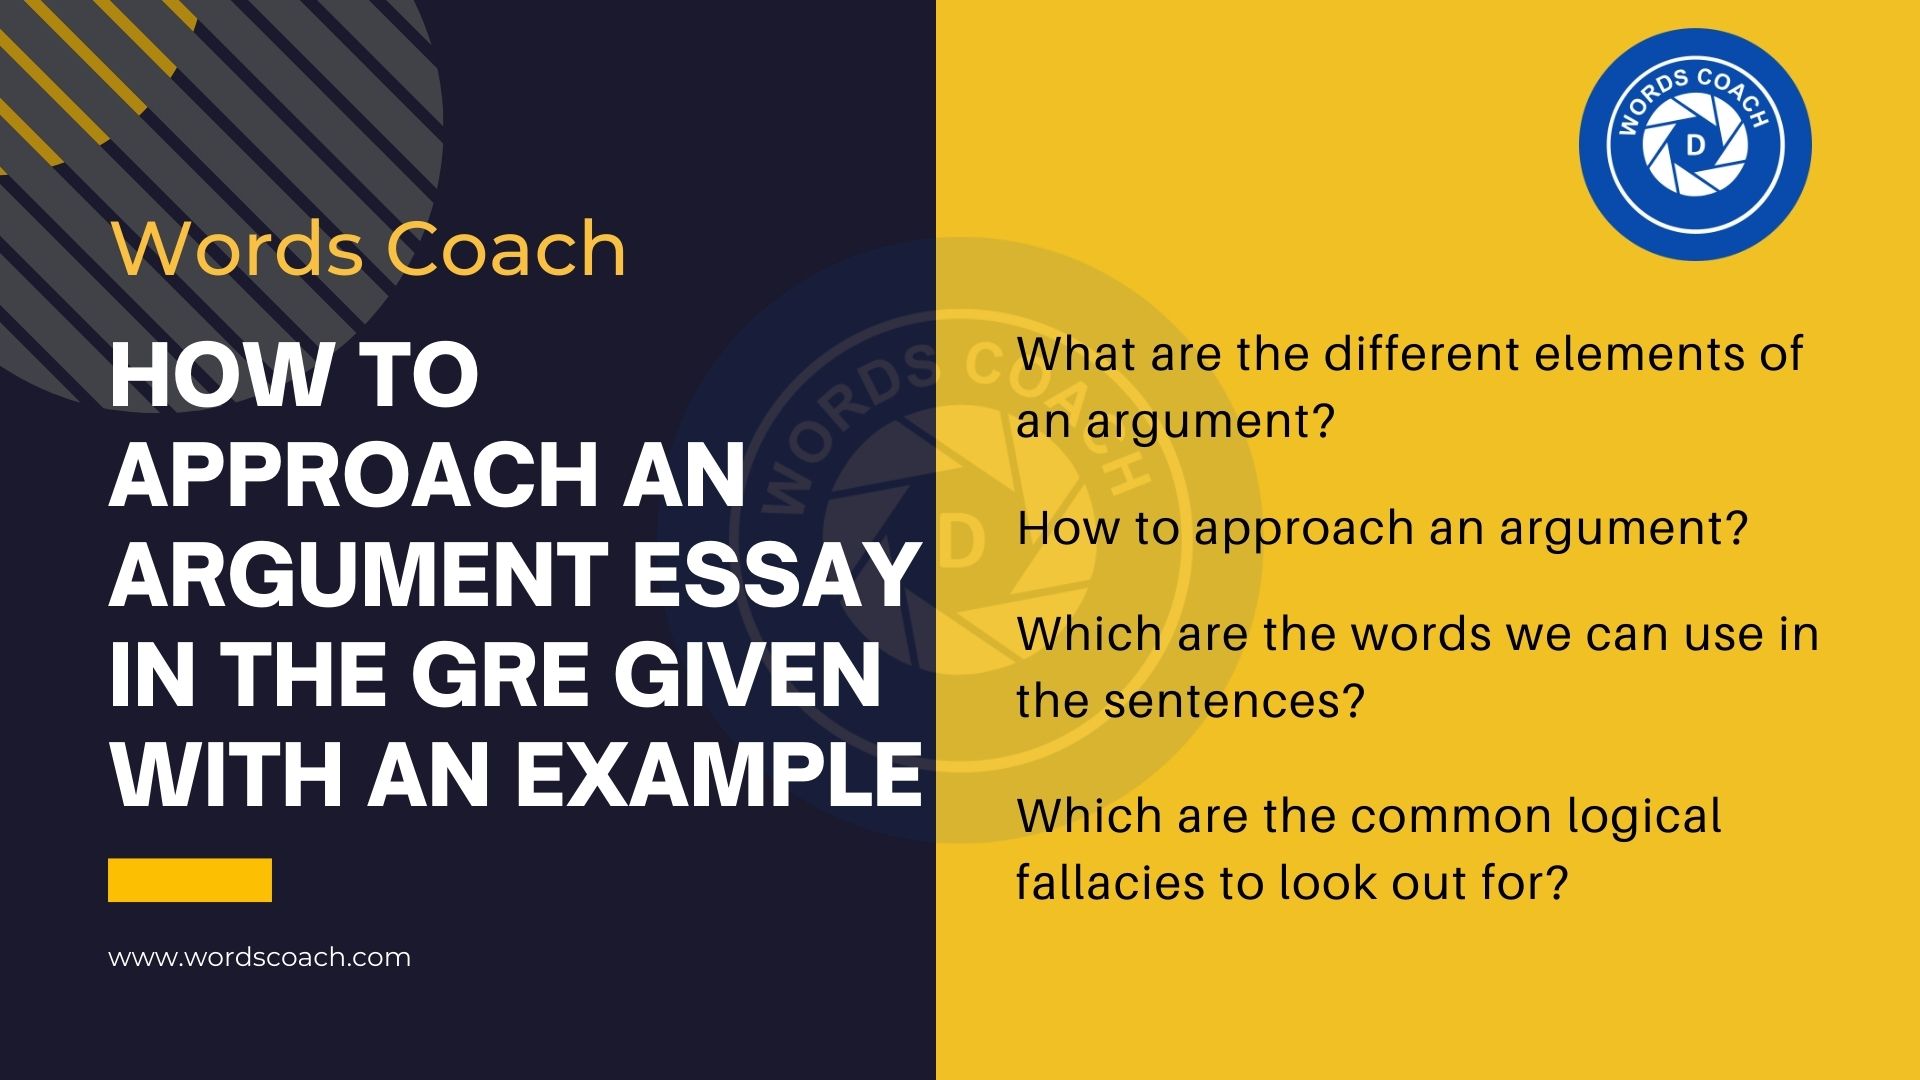 How to approach an Argument Essay in the GRE given with an example